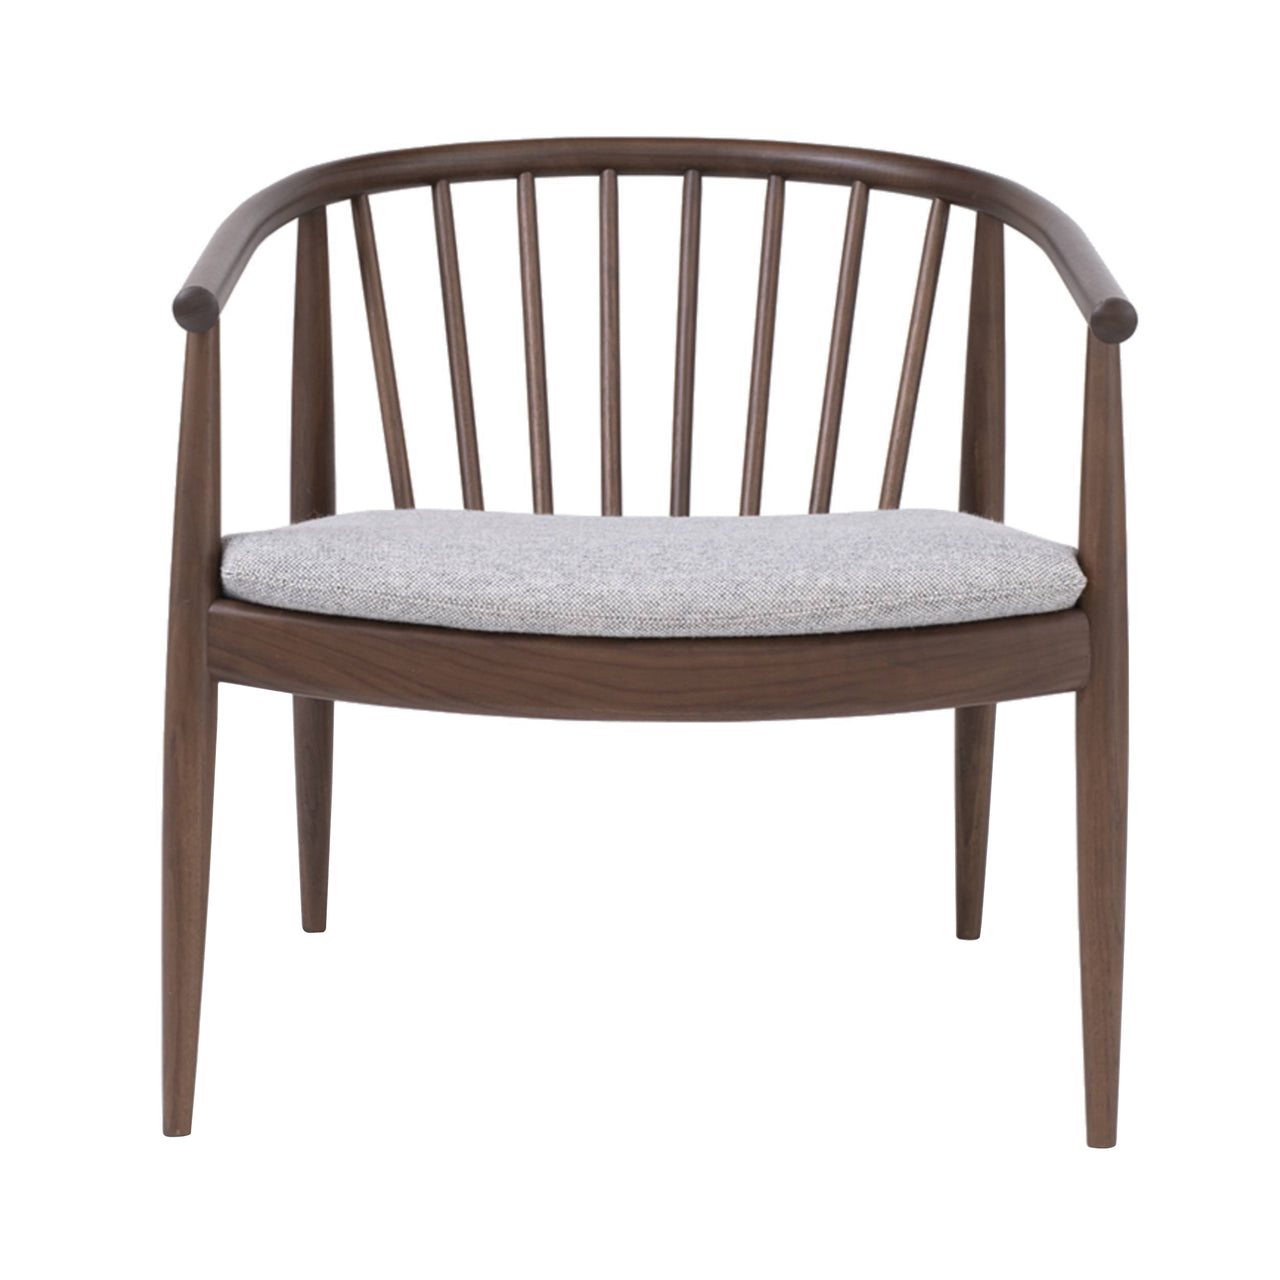 Reprise Chair: Upholstered + Natural Walnut + Without Back Cushion